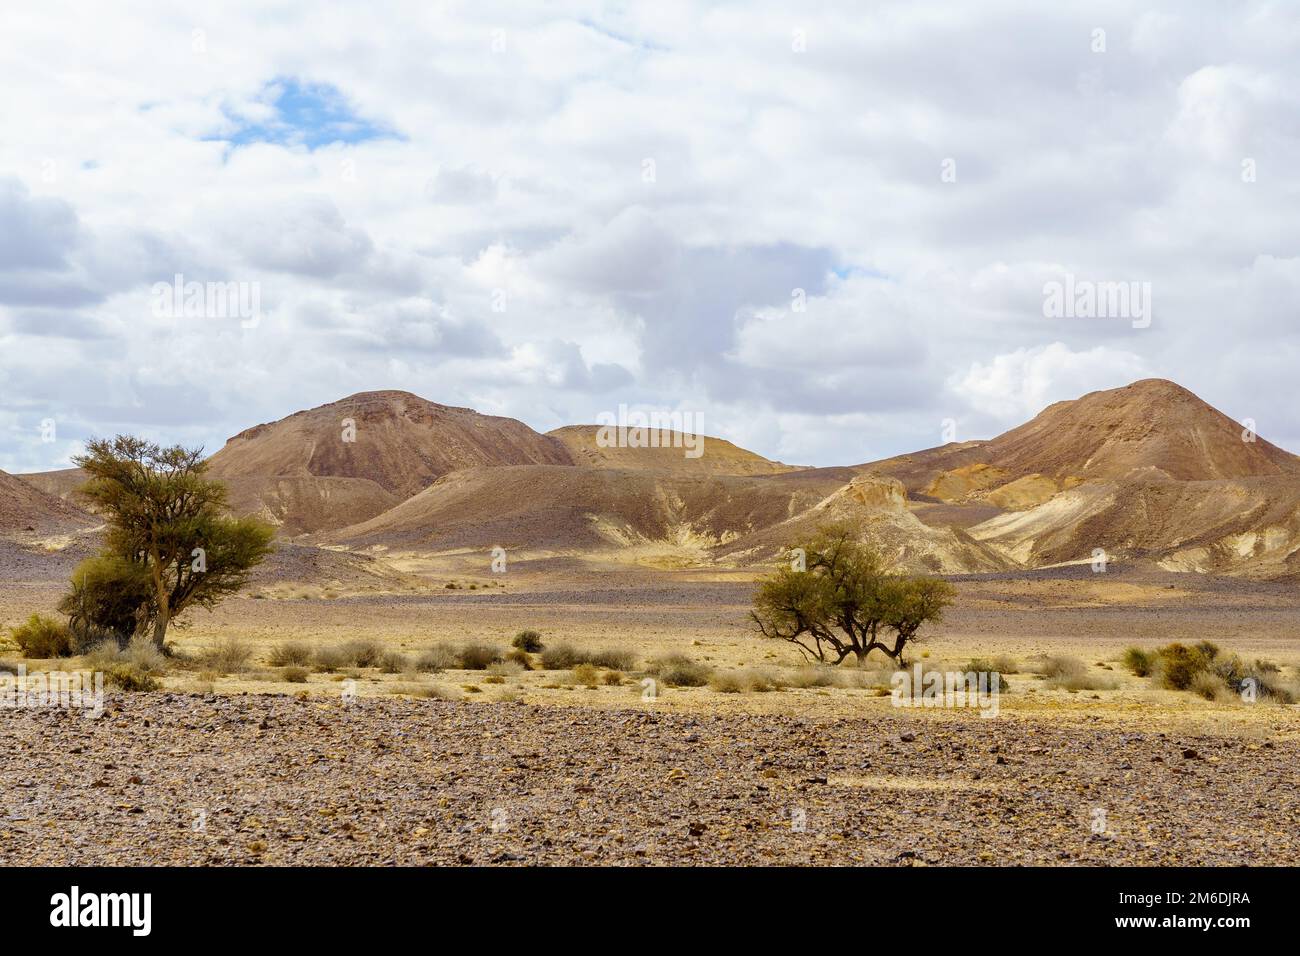 Winter view of desert landscape in Kedar valley, Massive Eilat Nature Reserve, southern Israel Stock Photo